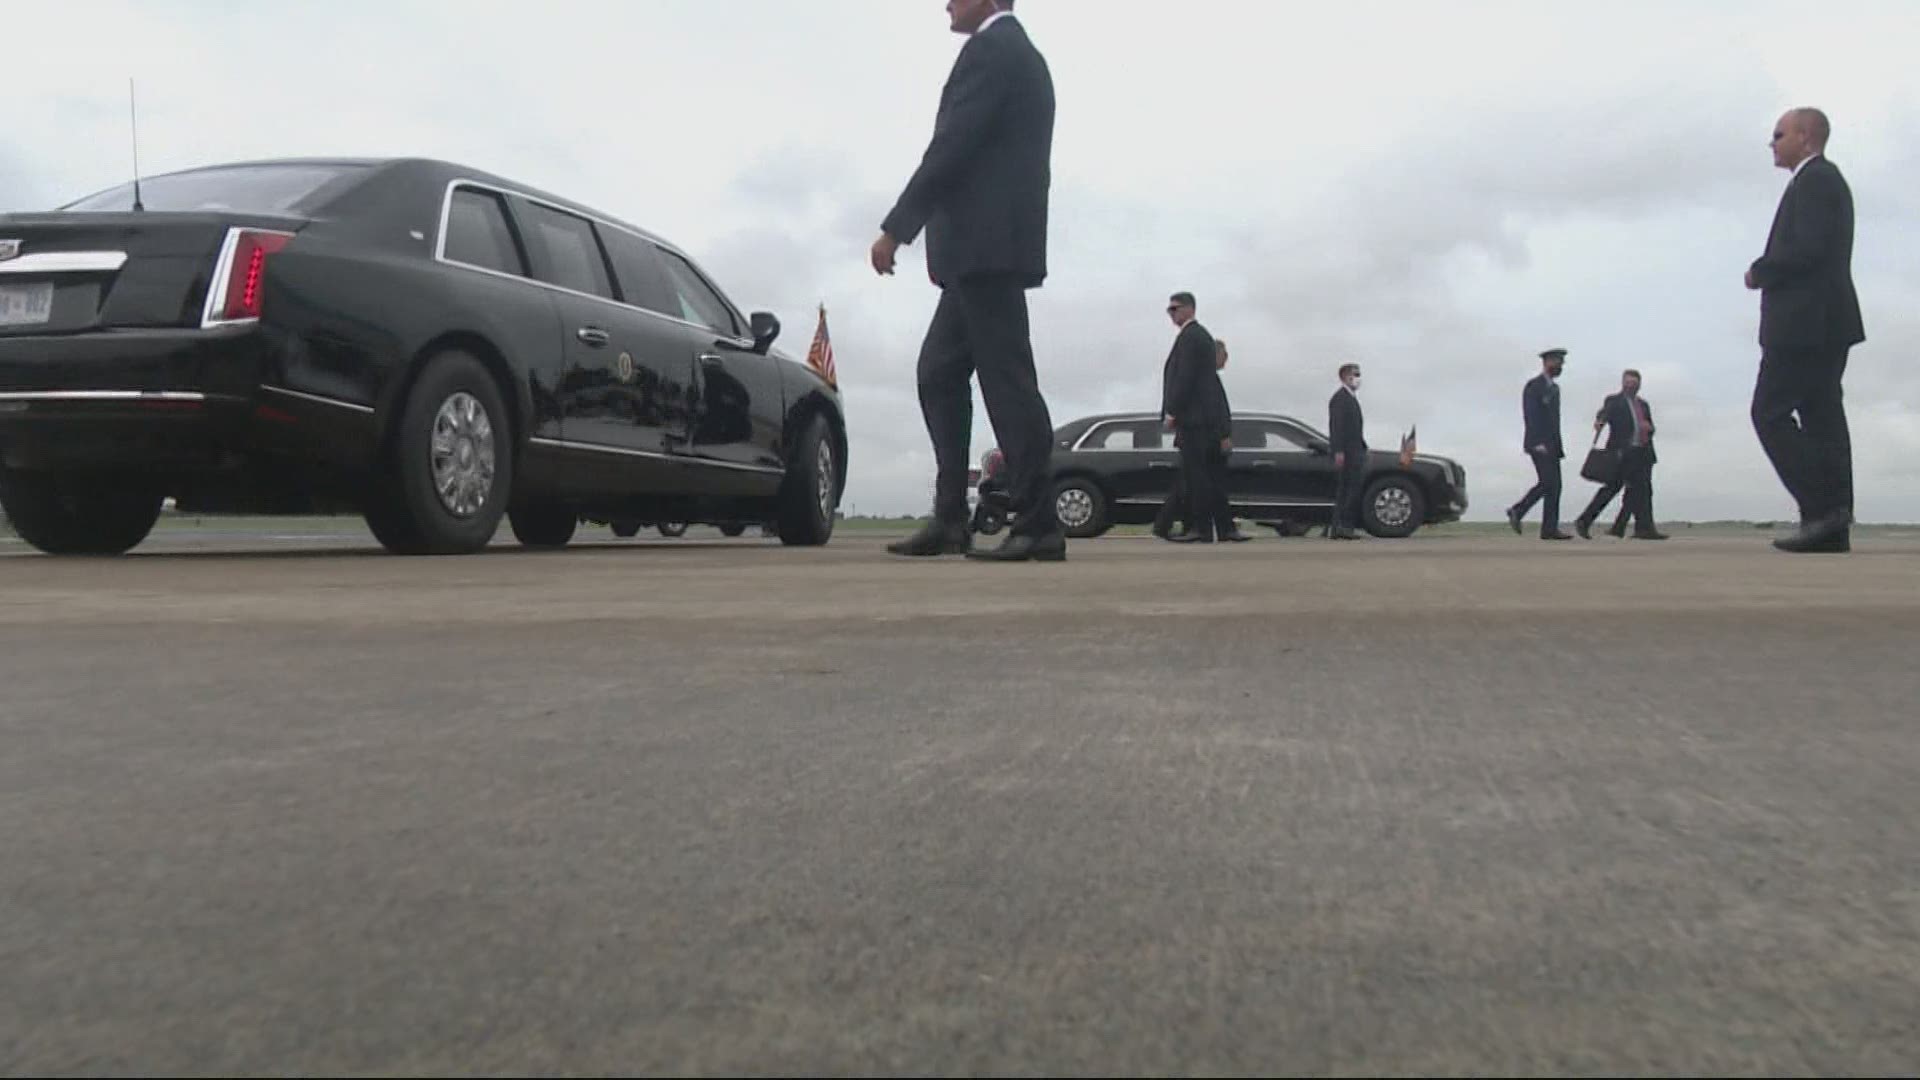 A long procession of highly secured vehicles carried the President, White House staff and reporters to the convention.